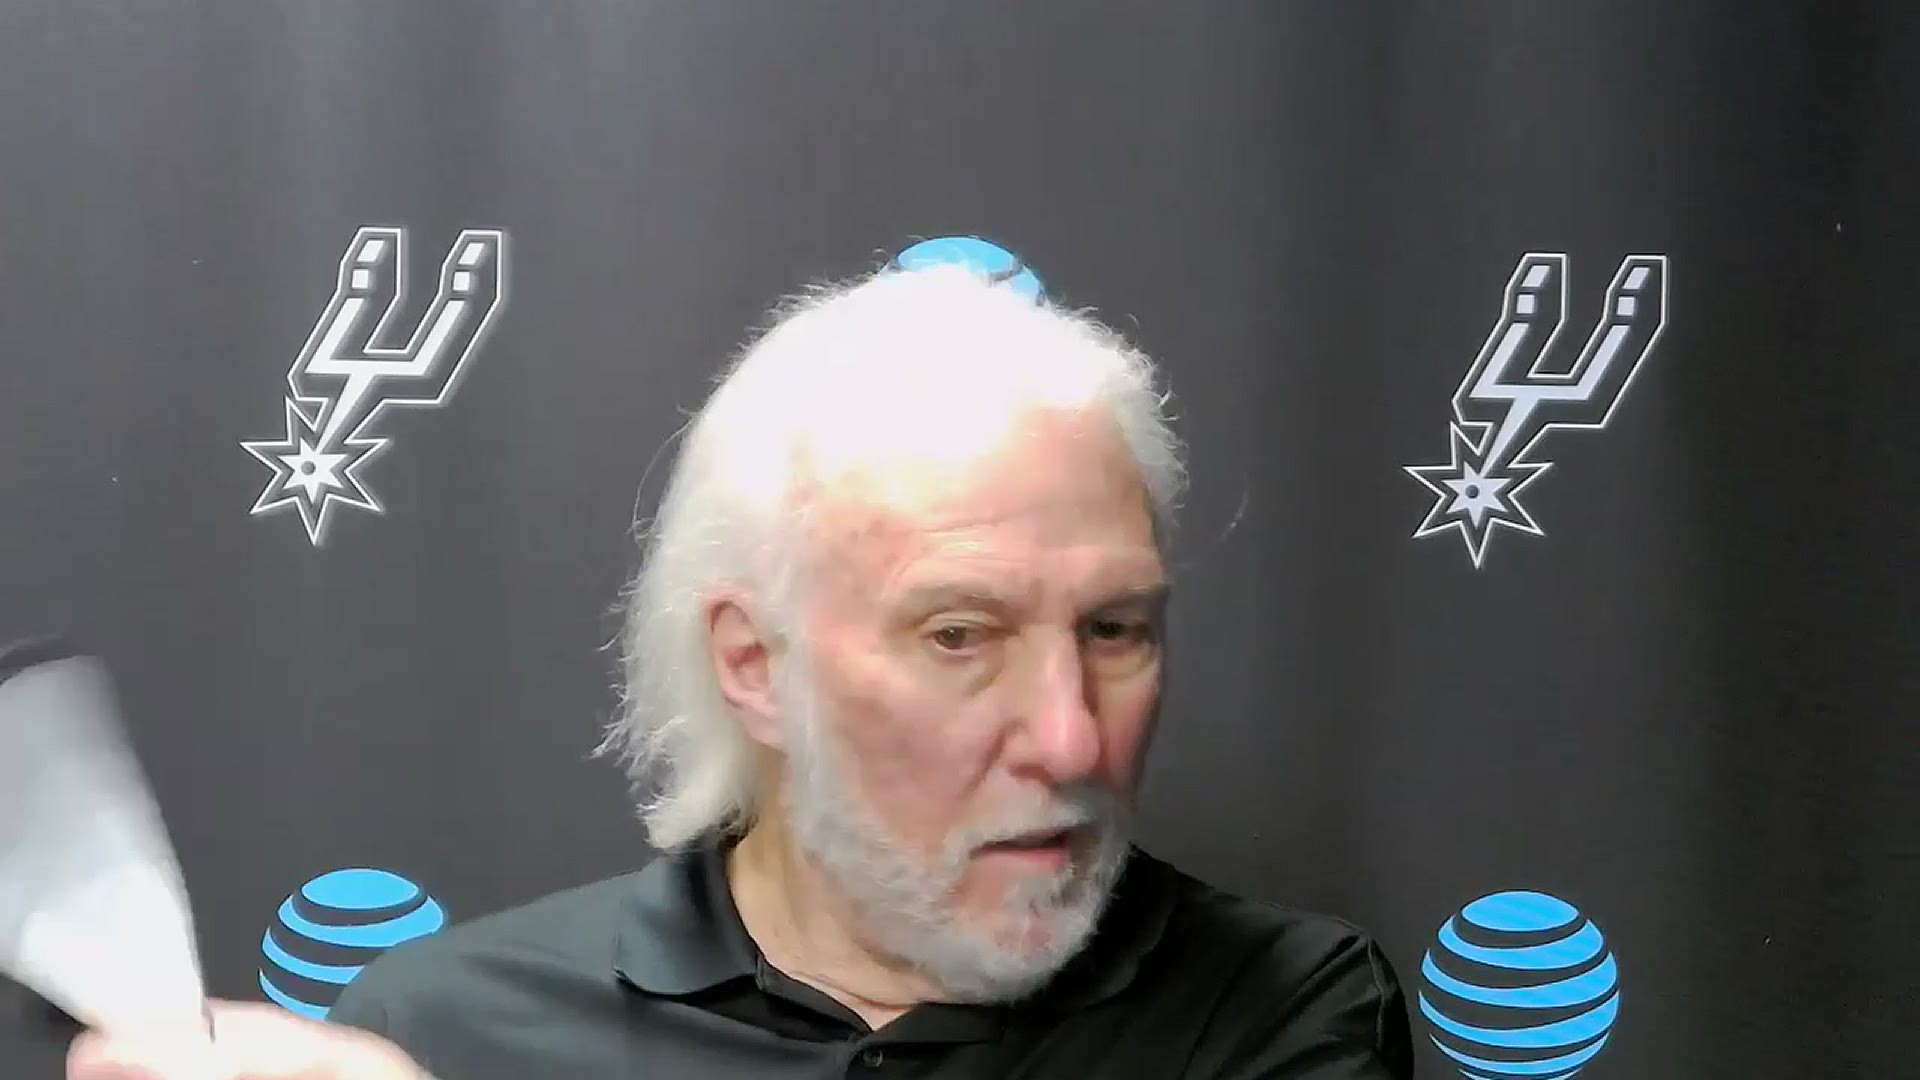 Pop praised his team for hanging in the game and playing well in the second half, singling out Patty Mills and Jakob Poeltl, who had a career game.